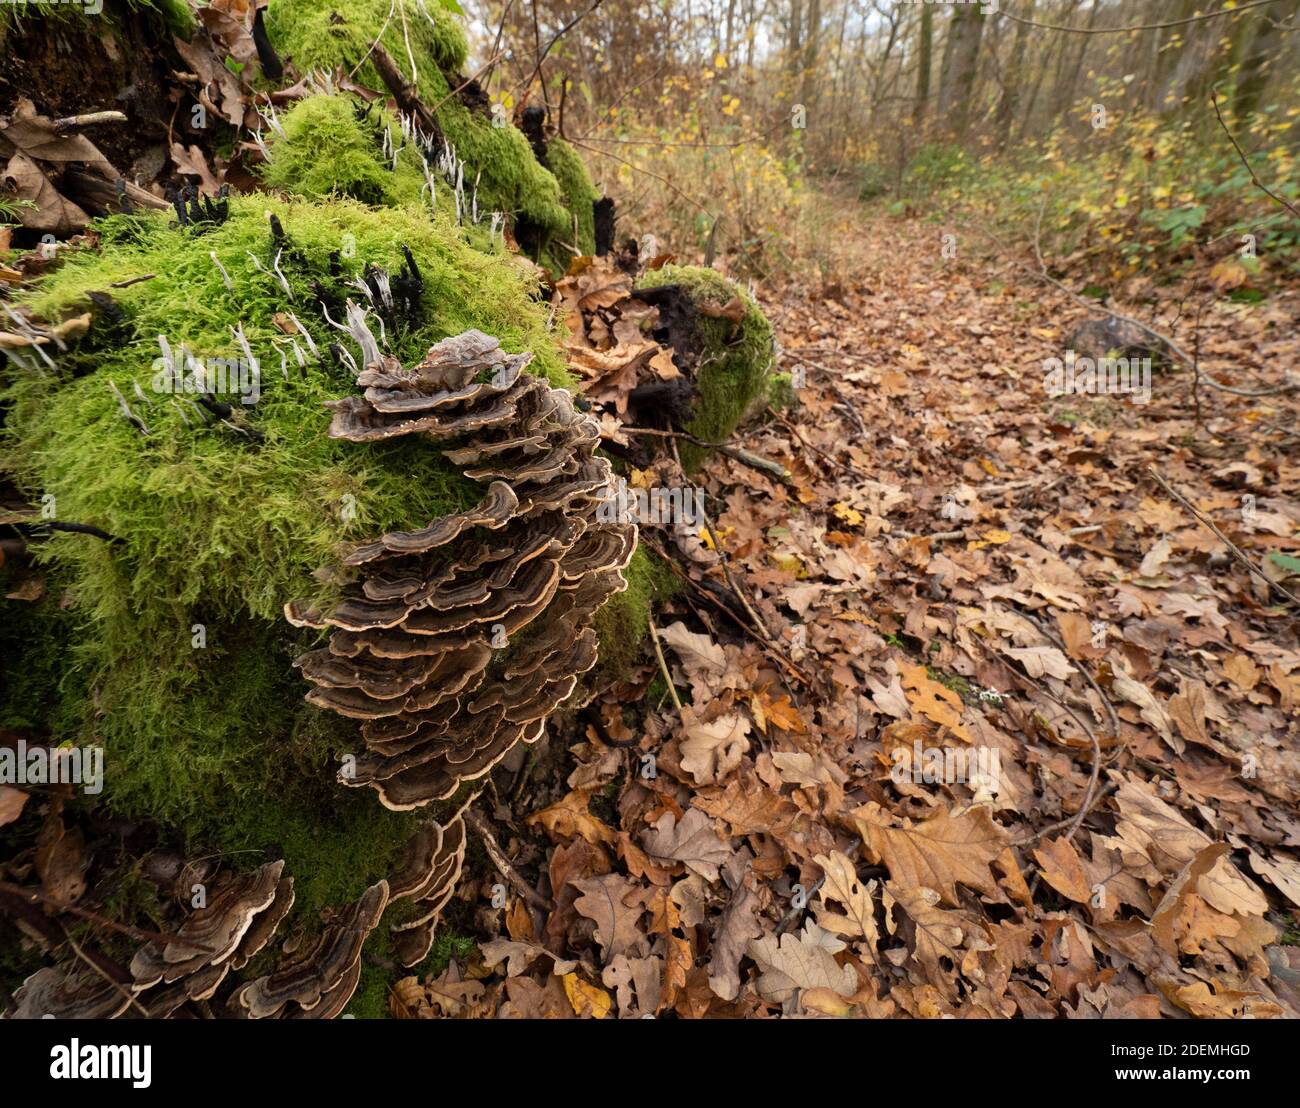 Turkey Tail Fungi (Trametes versicolor), common polypore fungus, Dering Woods, Kent UK, wide angle view Stock Photo